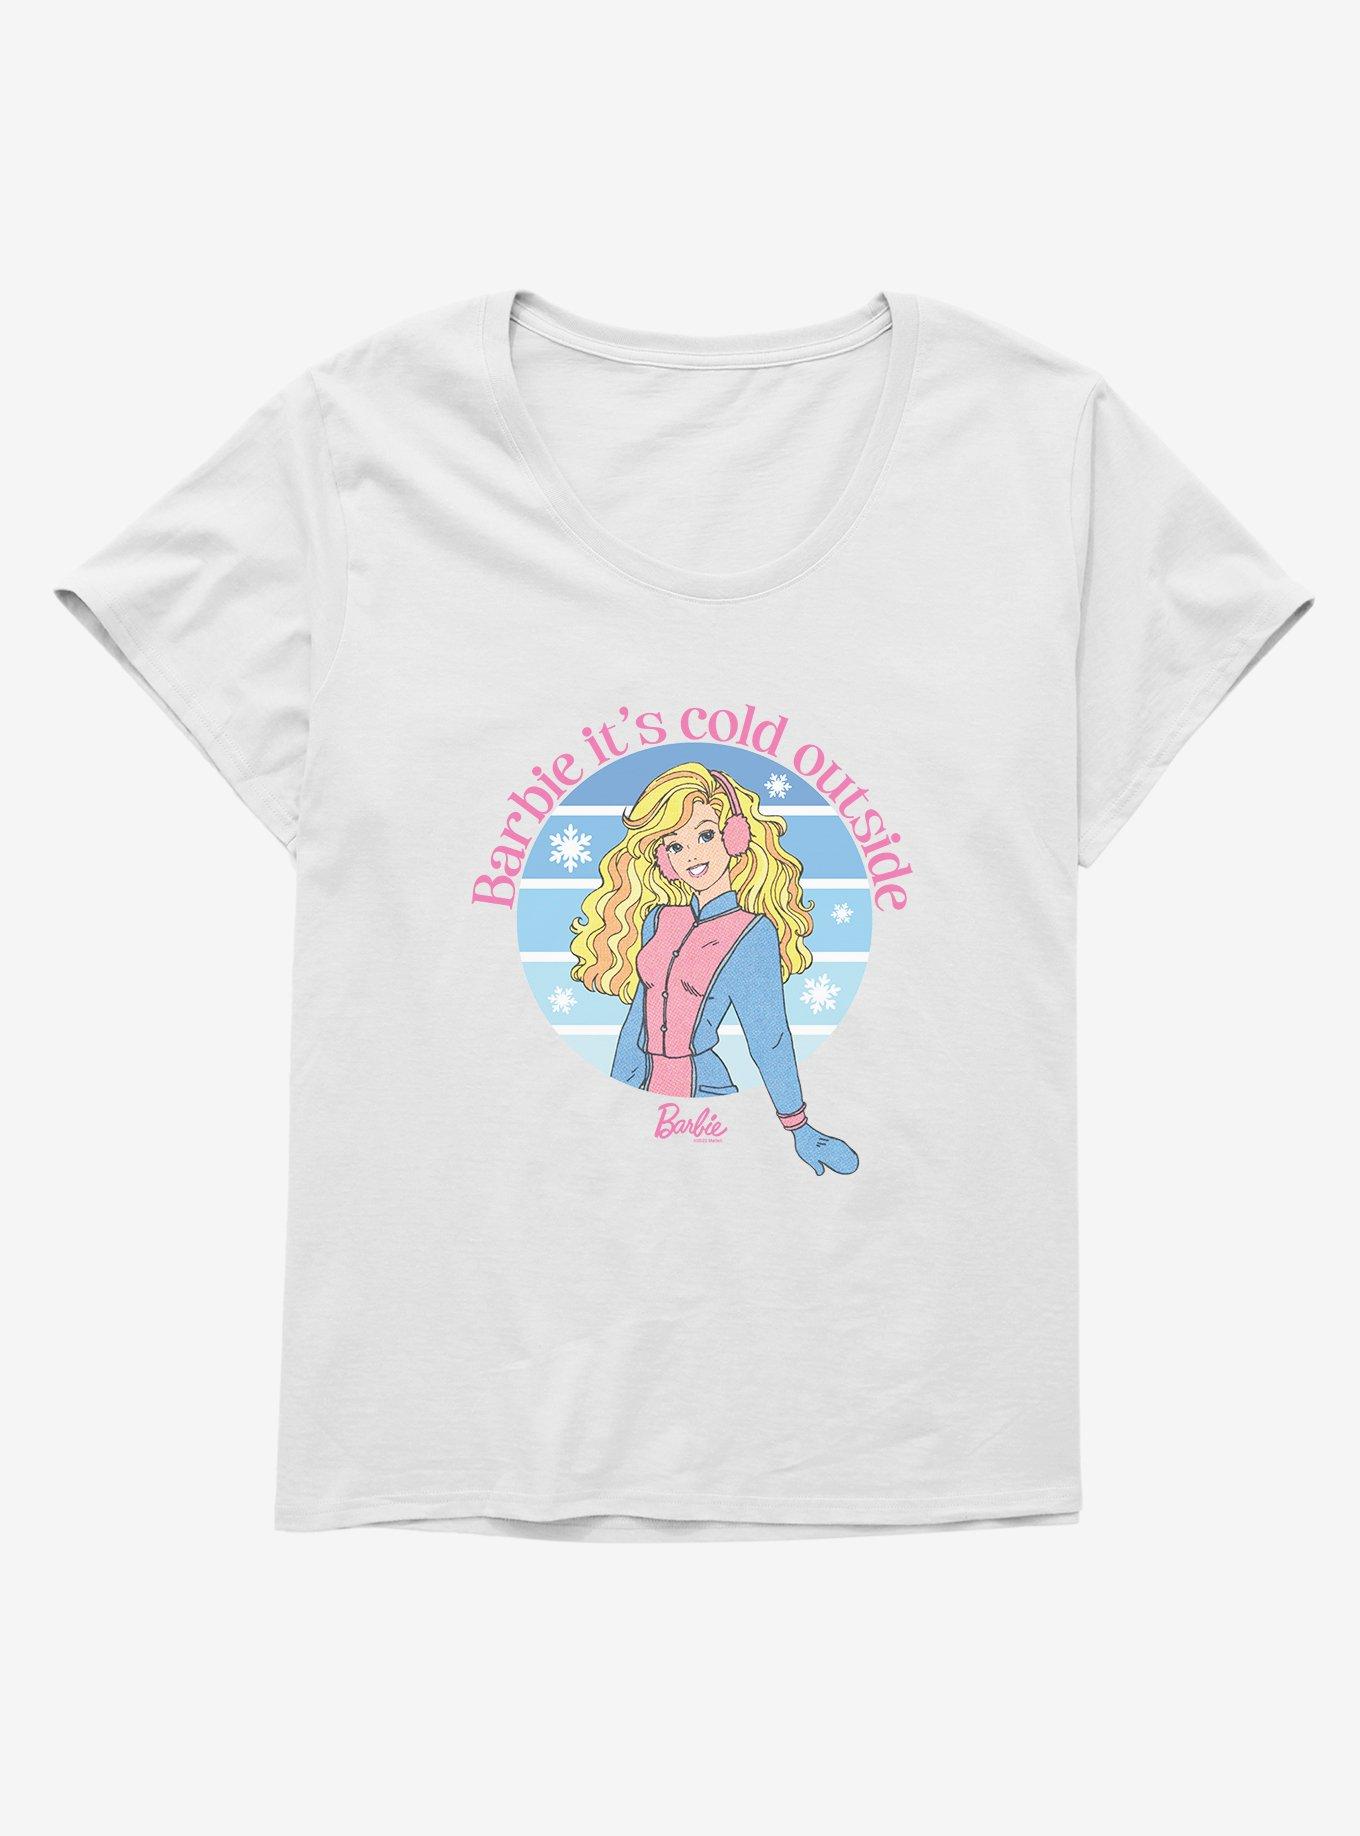 Barbie It's Cold Outside Girls T-Shirt Plus Size, WHITE, hi-res